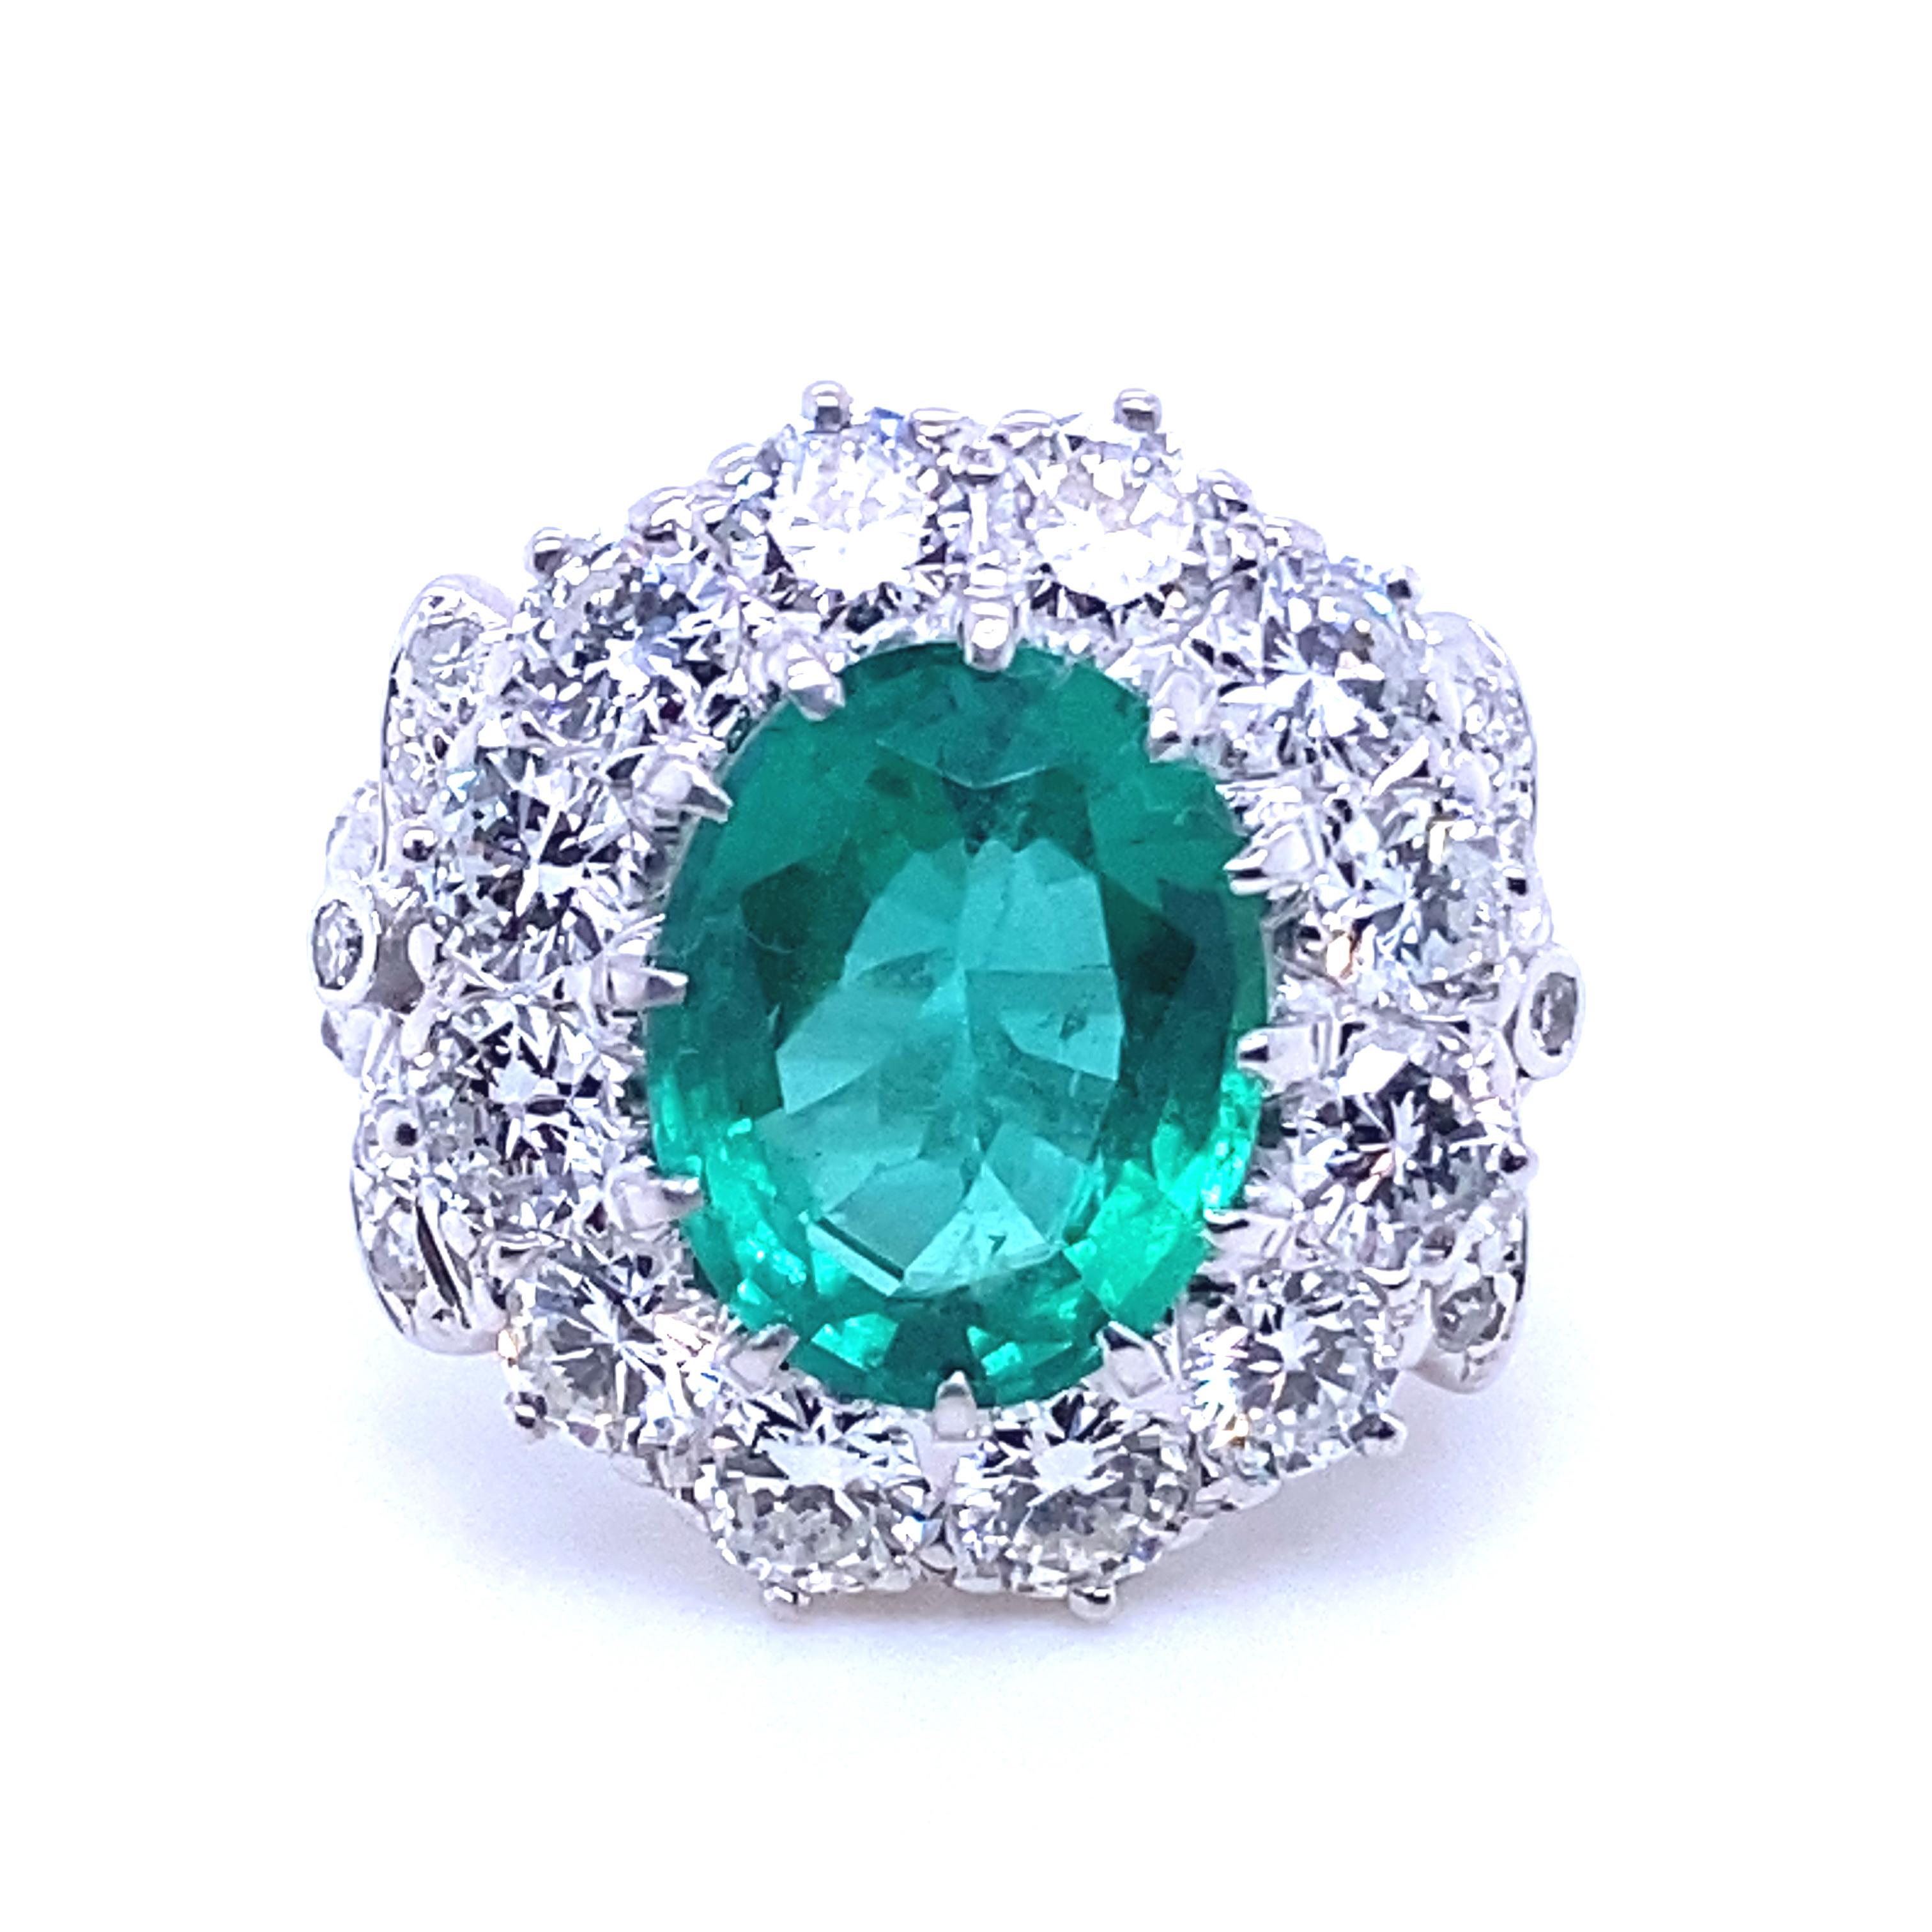 A 4.15 carat Zambian emerald and diamond cluster 18 karat white gold engagement ring.

This exceptional ring is set to its centre with an oval cut emerald of 4.15 carats with an accompanying certificate from The Gem and Pearl Laboratory, London